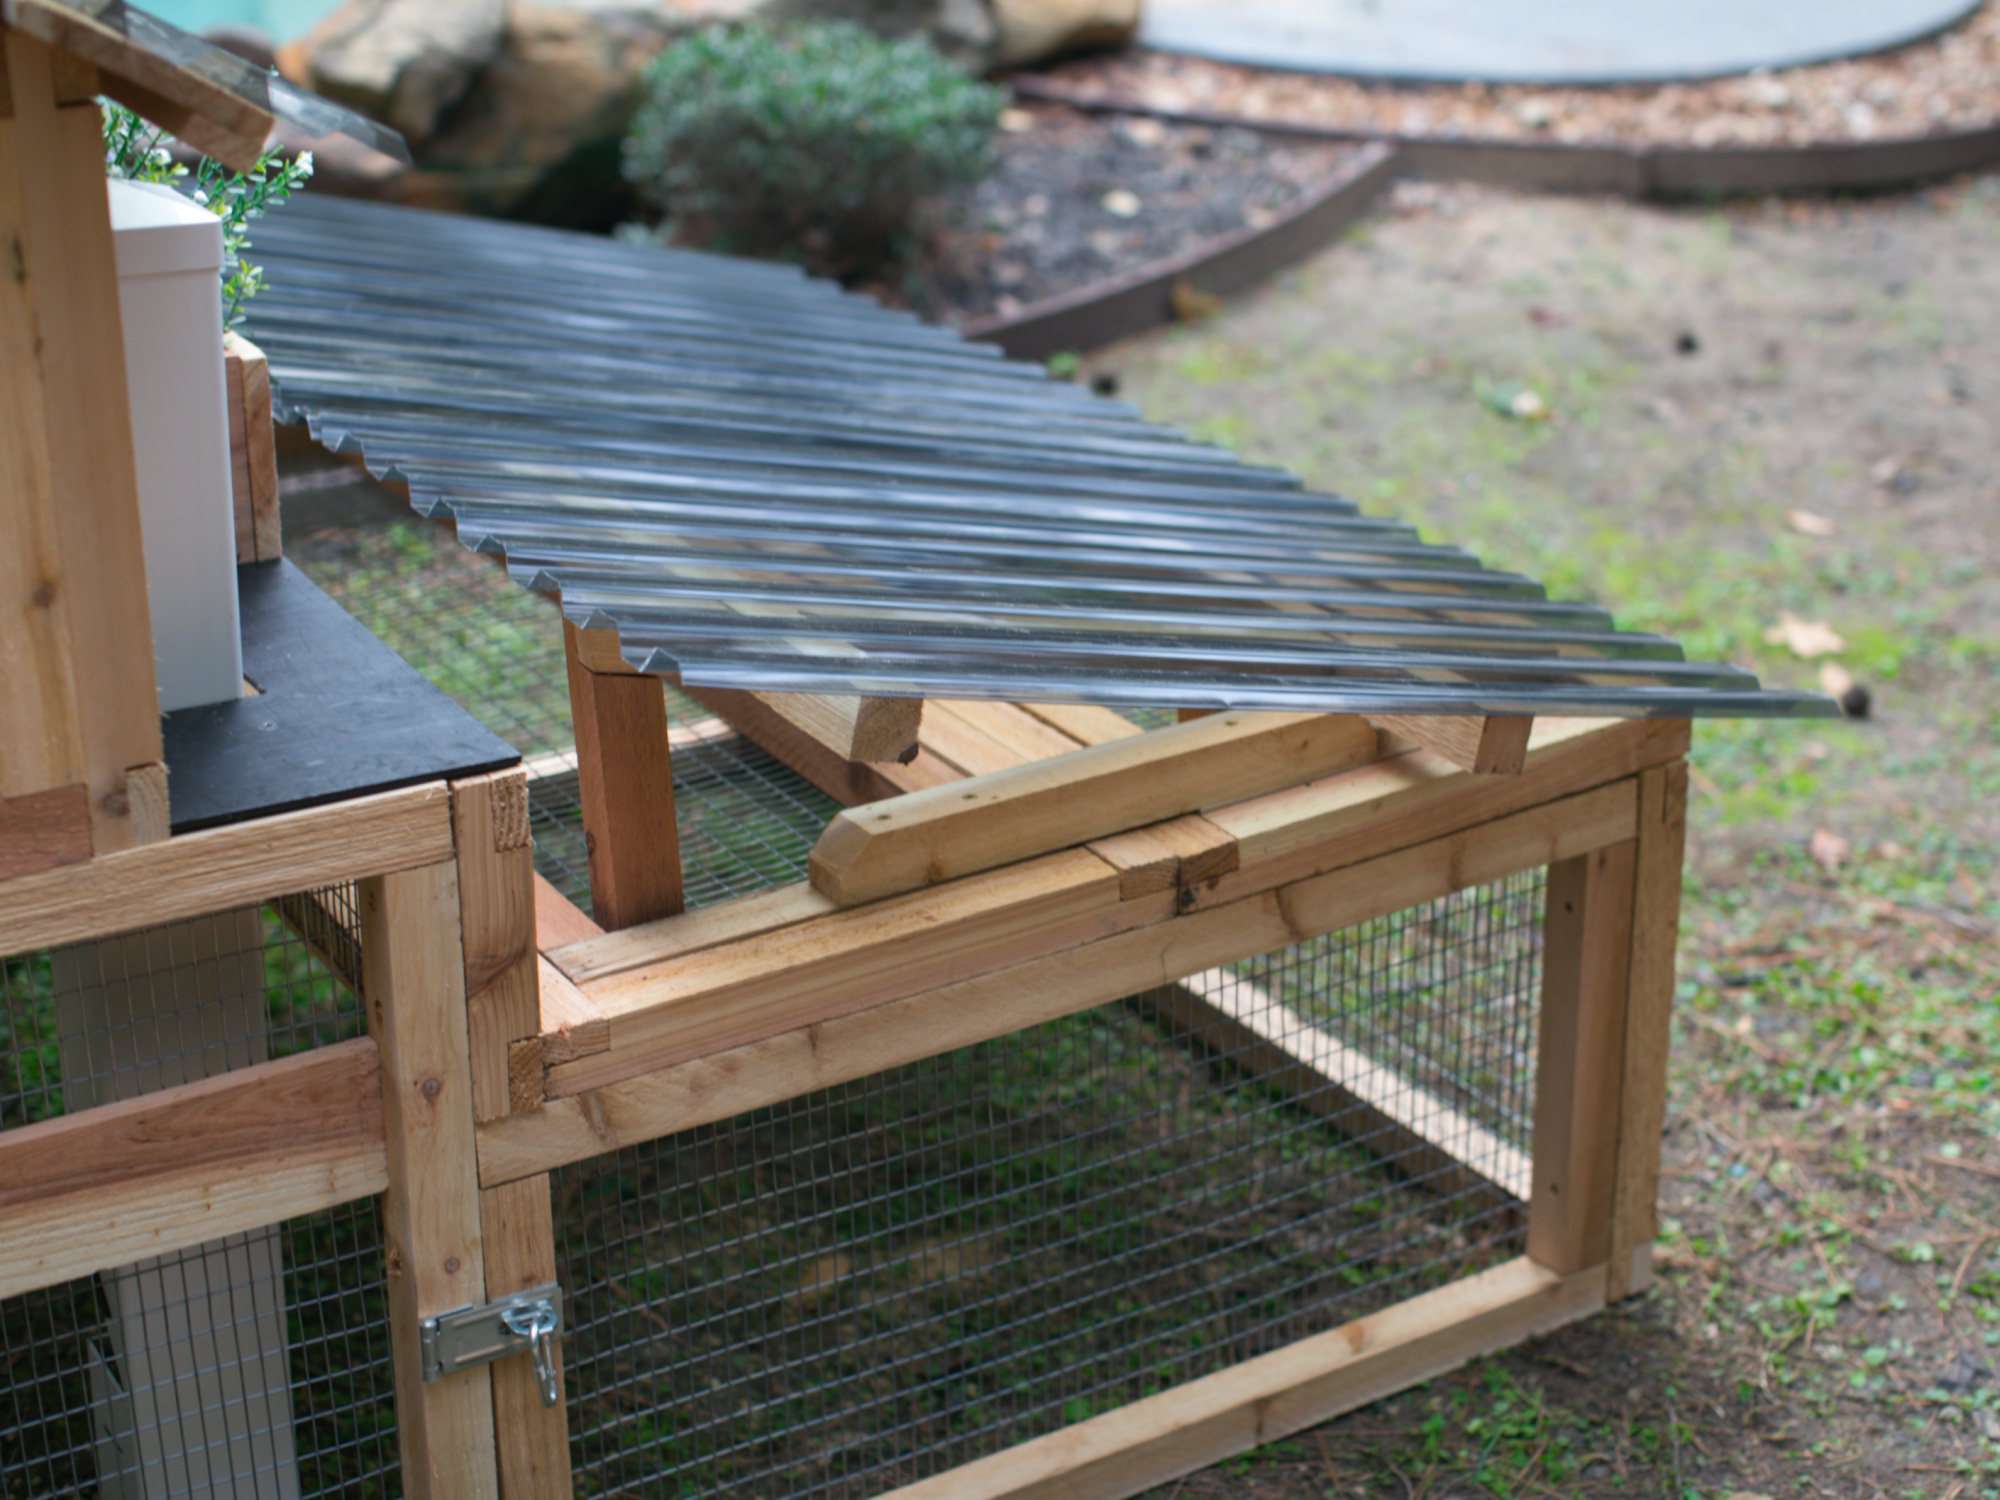 Roost-Root-Backyard-XL-Chicken-Coop-M2-Sun-Shade-Roof